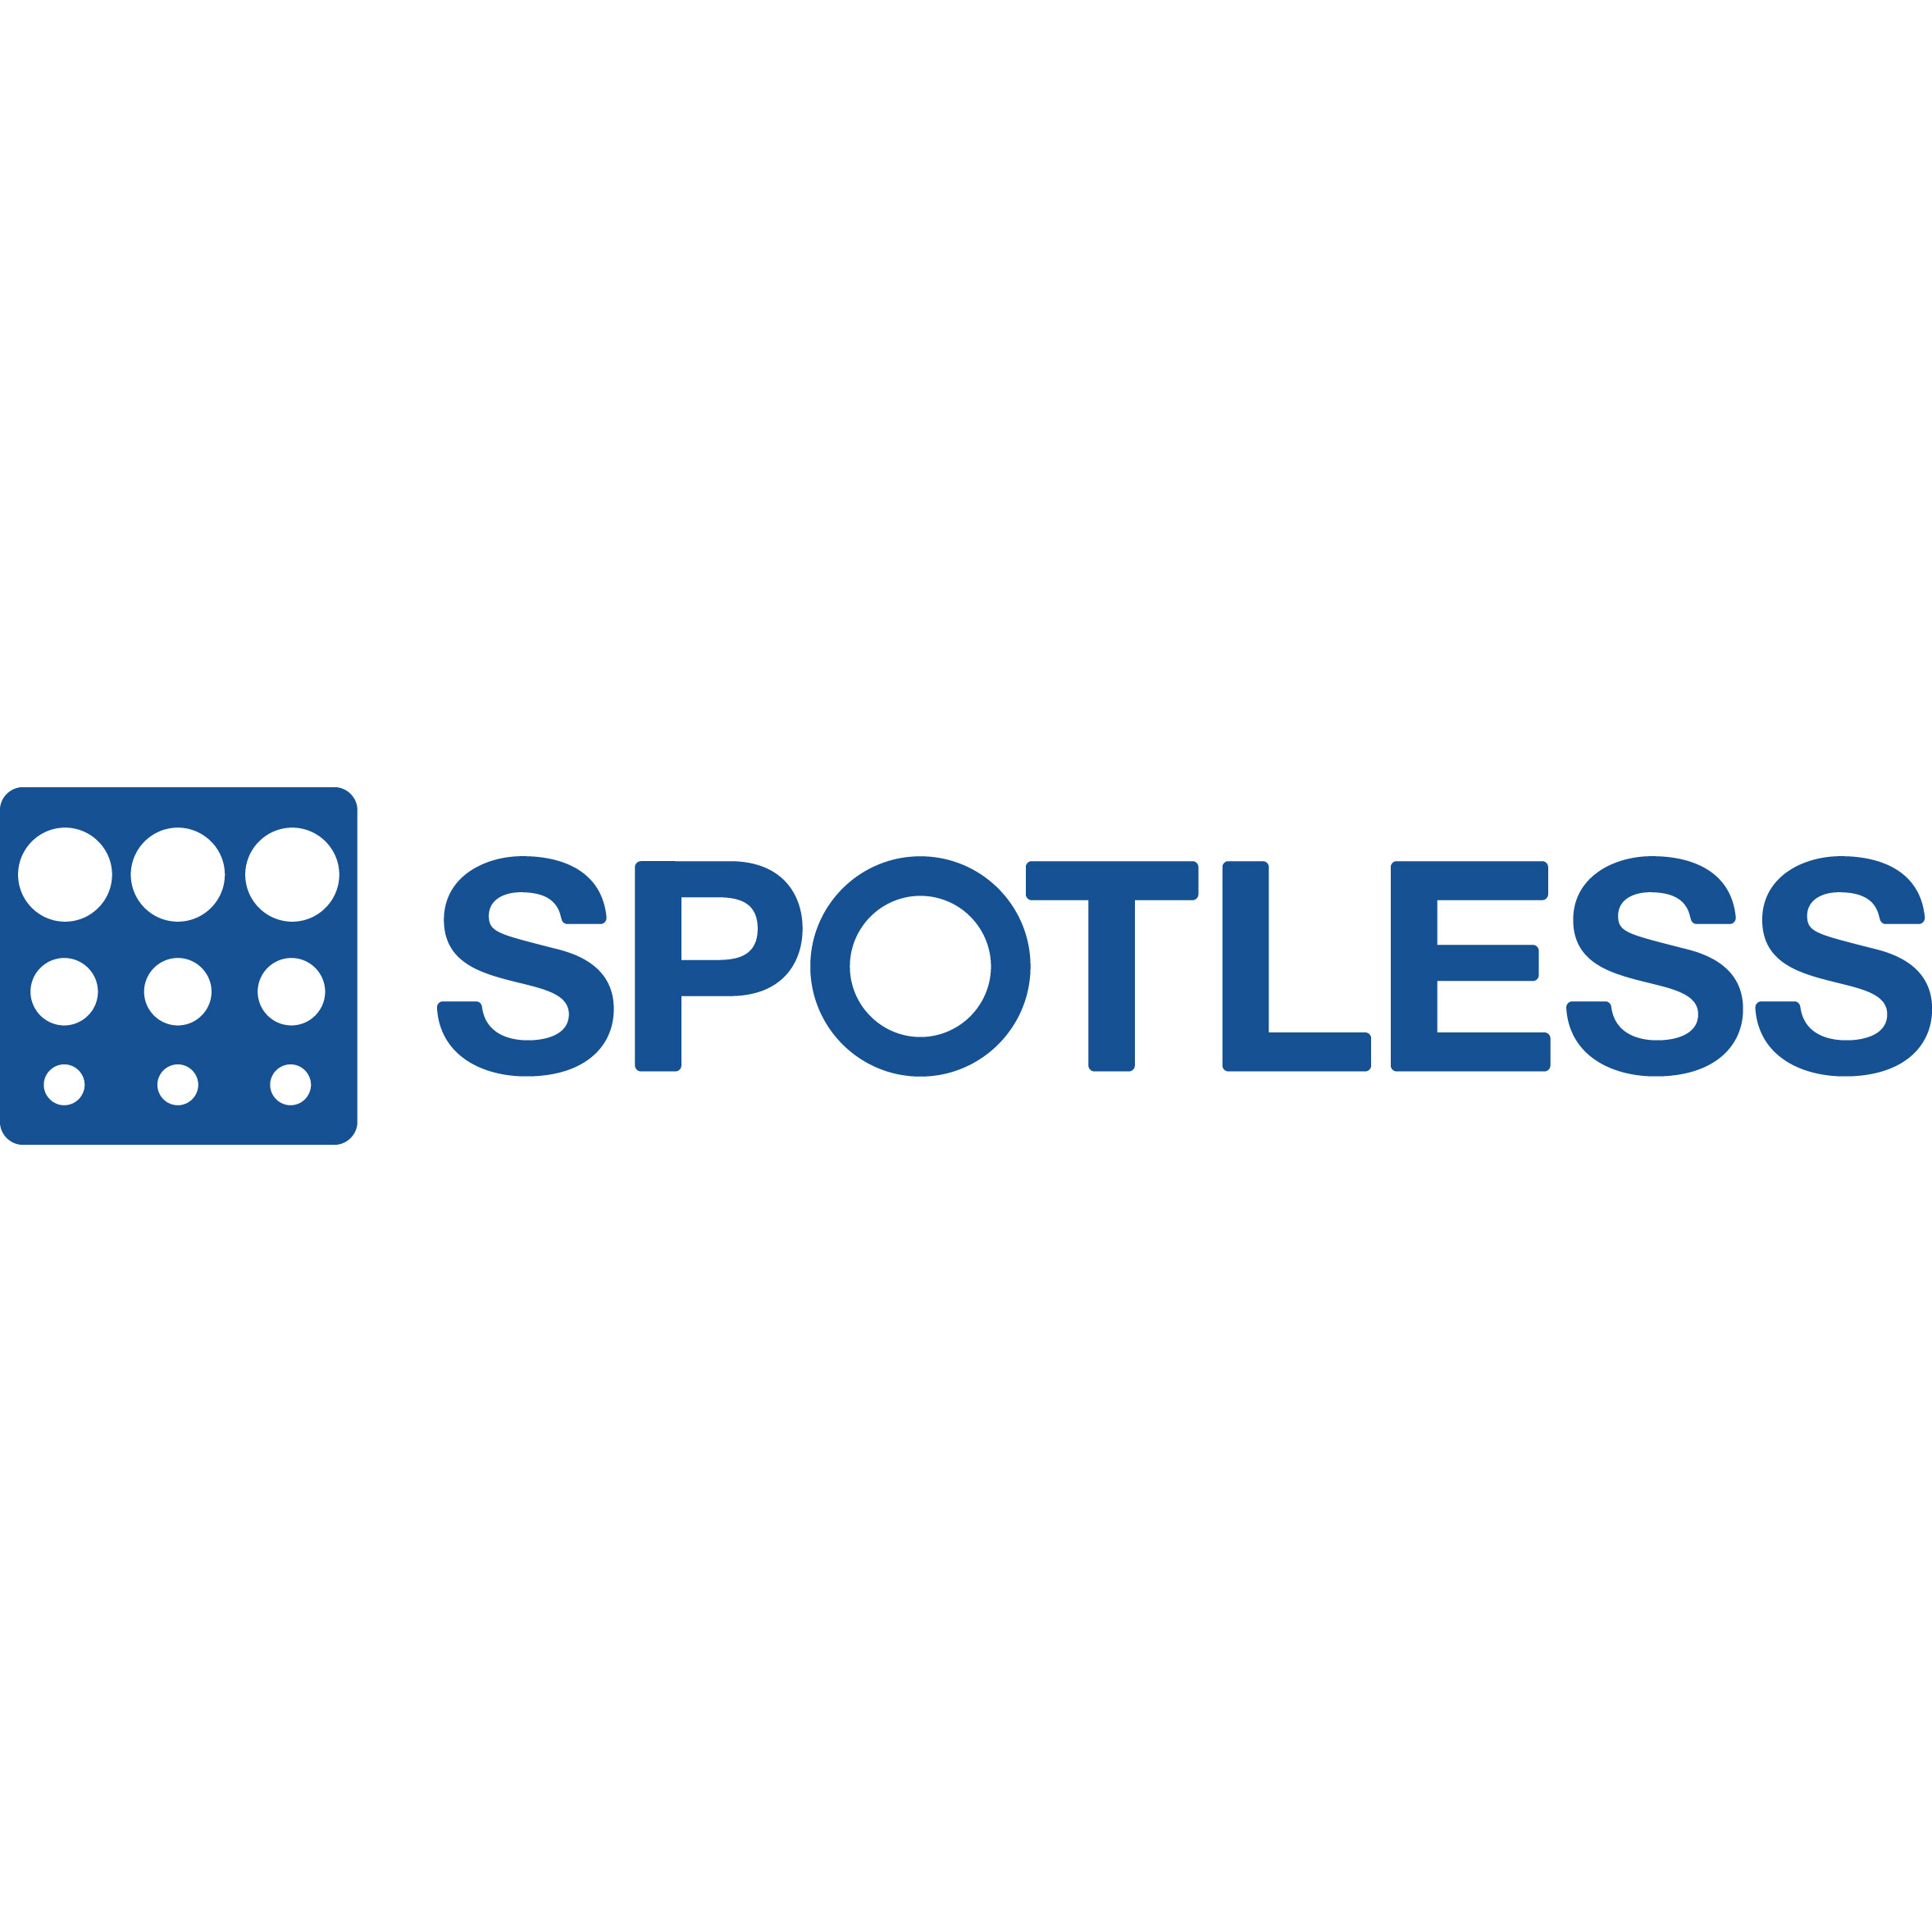 Spotless Catering   Spotless Png - Spotless Vector, Transparent background PNG HD thumbnail